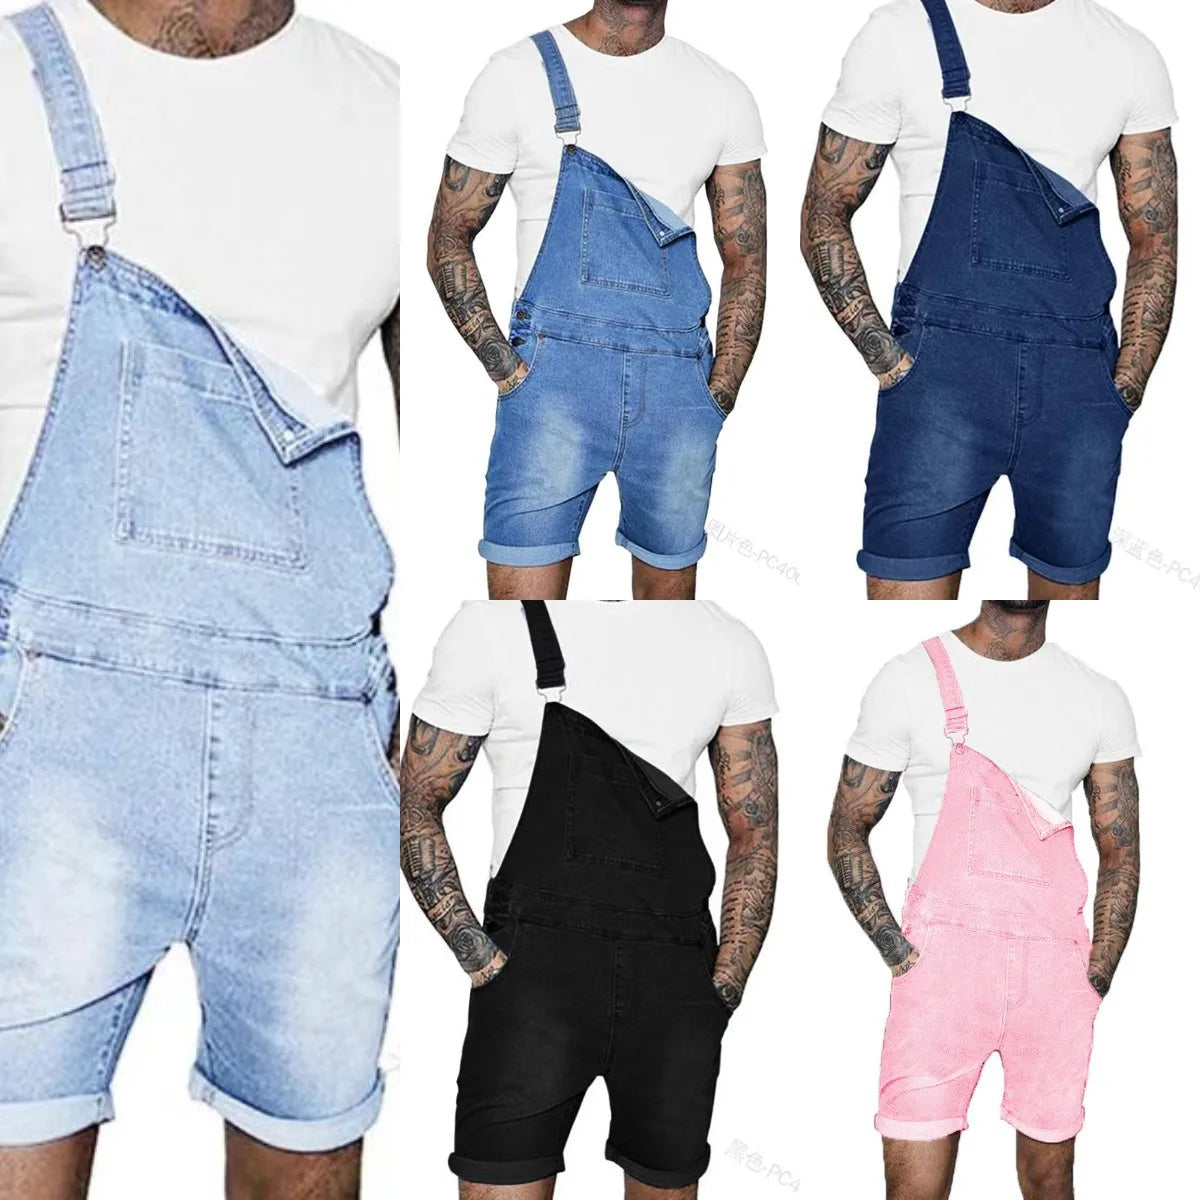 Men Jeans Rompers Overalls Wide Leg Pants Washing Spliced One Piece Pockets Summer Jumpsuits Knee Length Casual Distressed